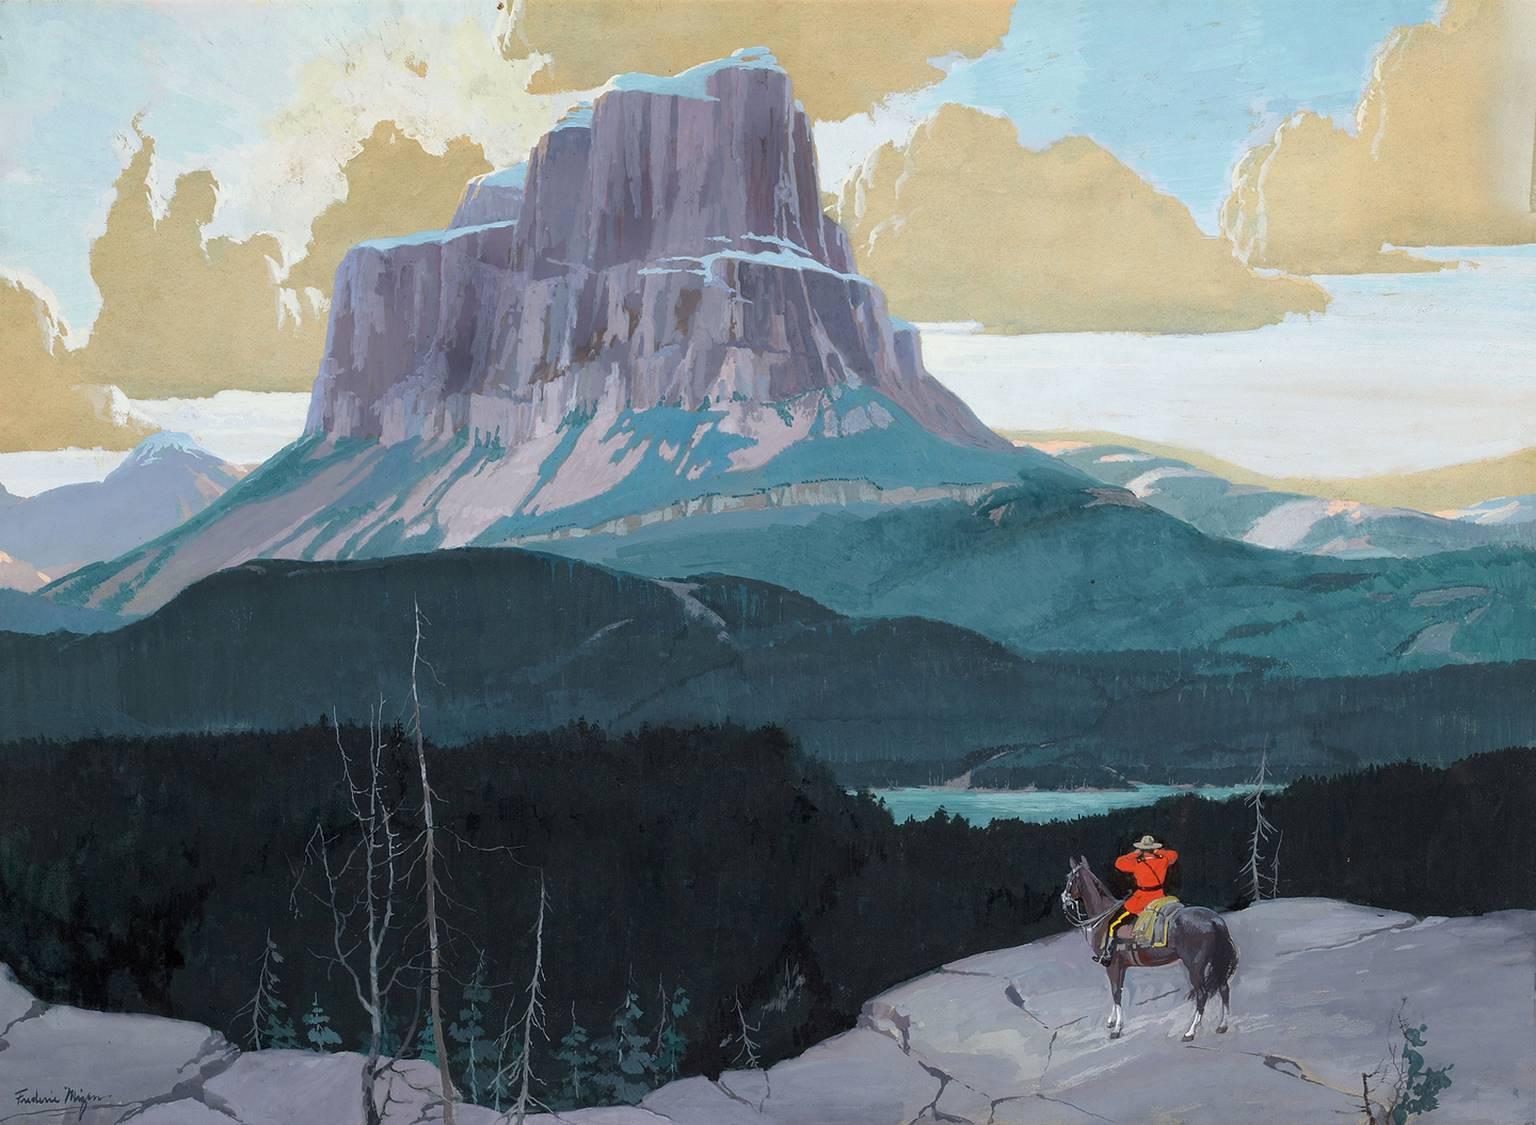 FREDERIC KIMBALL MIZEN Landscape Painting – CanadianMountie Gazing at Butte